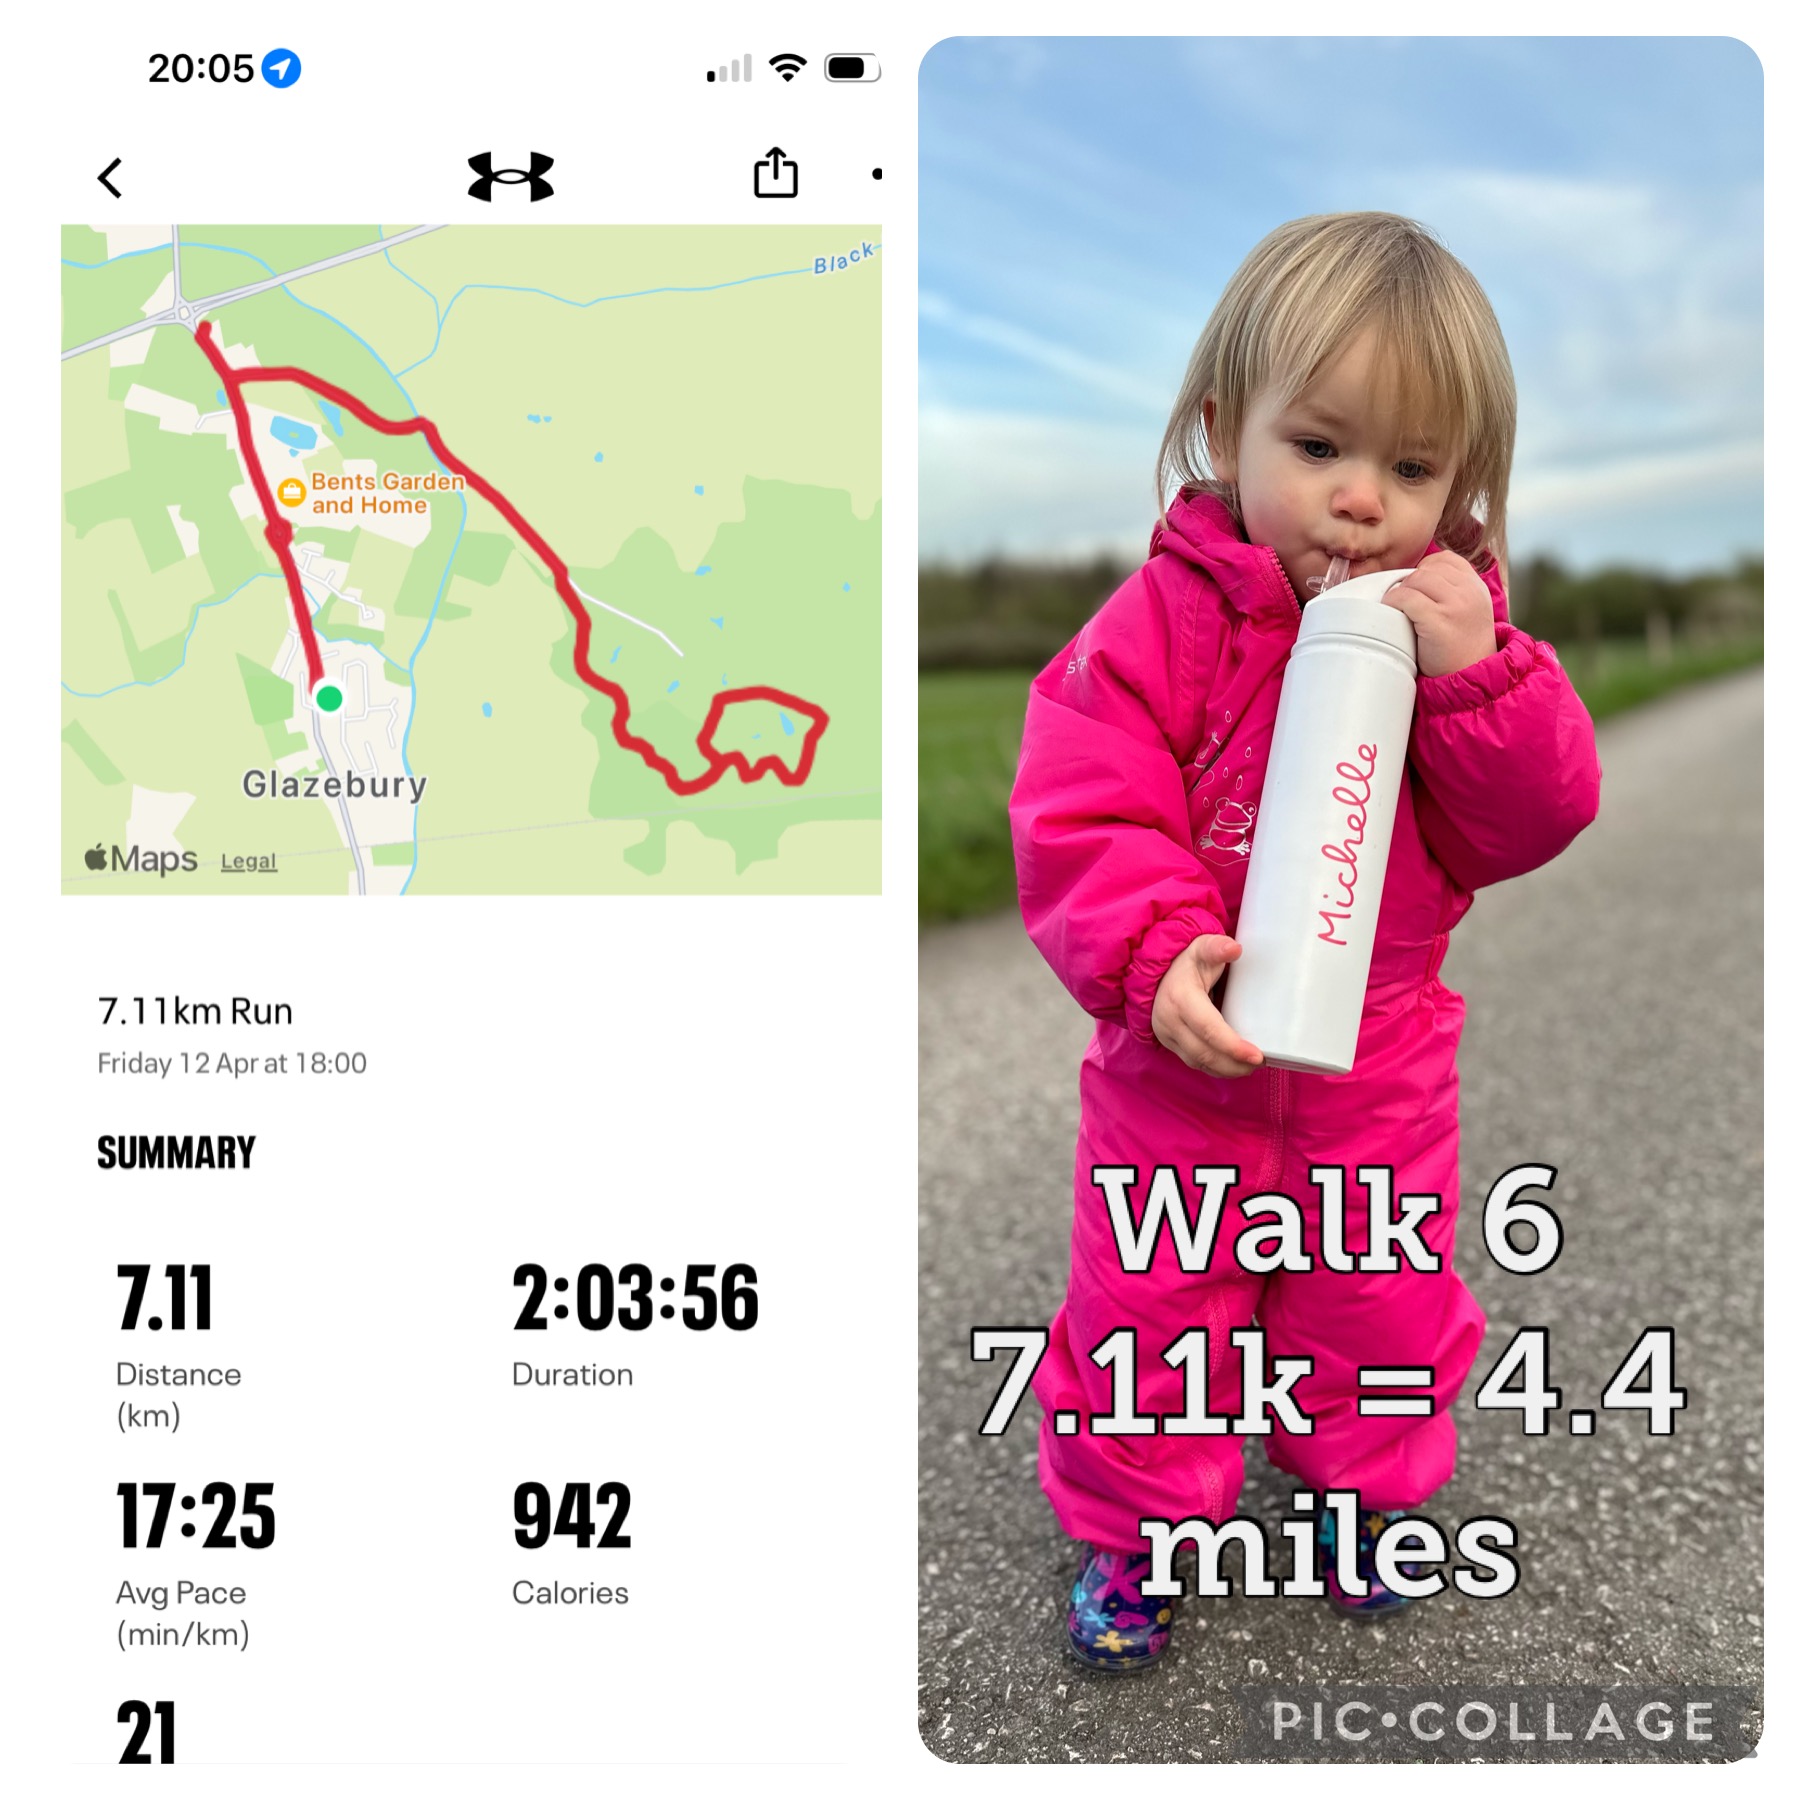 6th walk completed